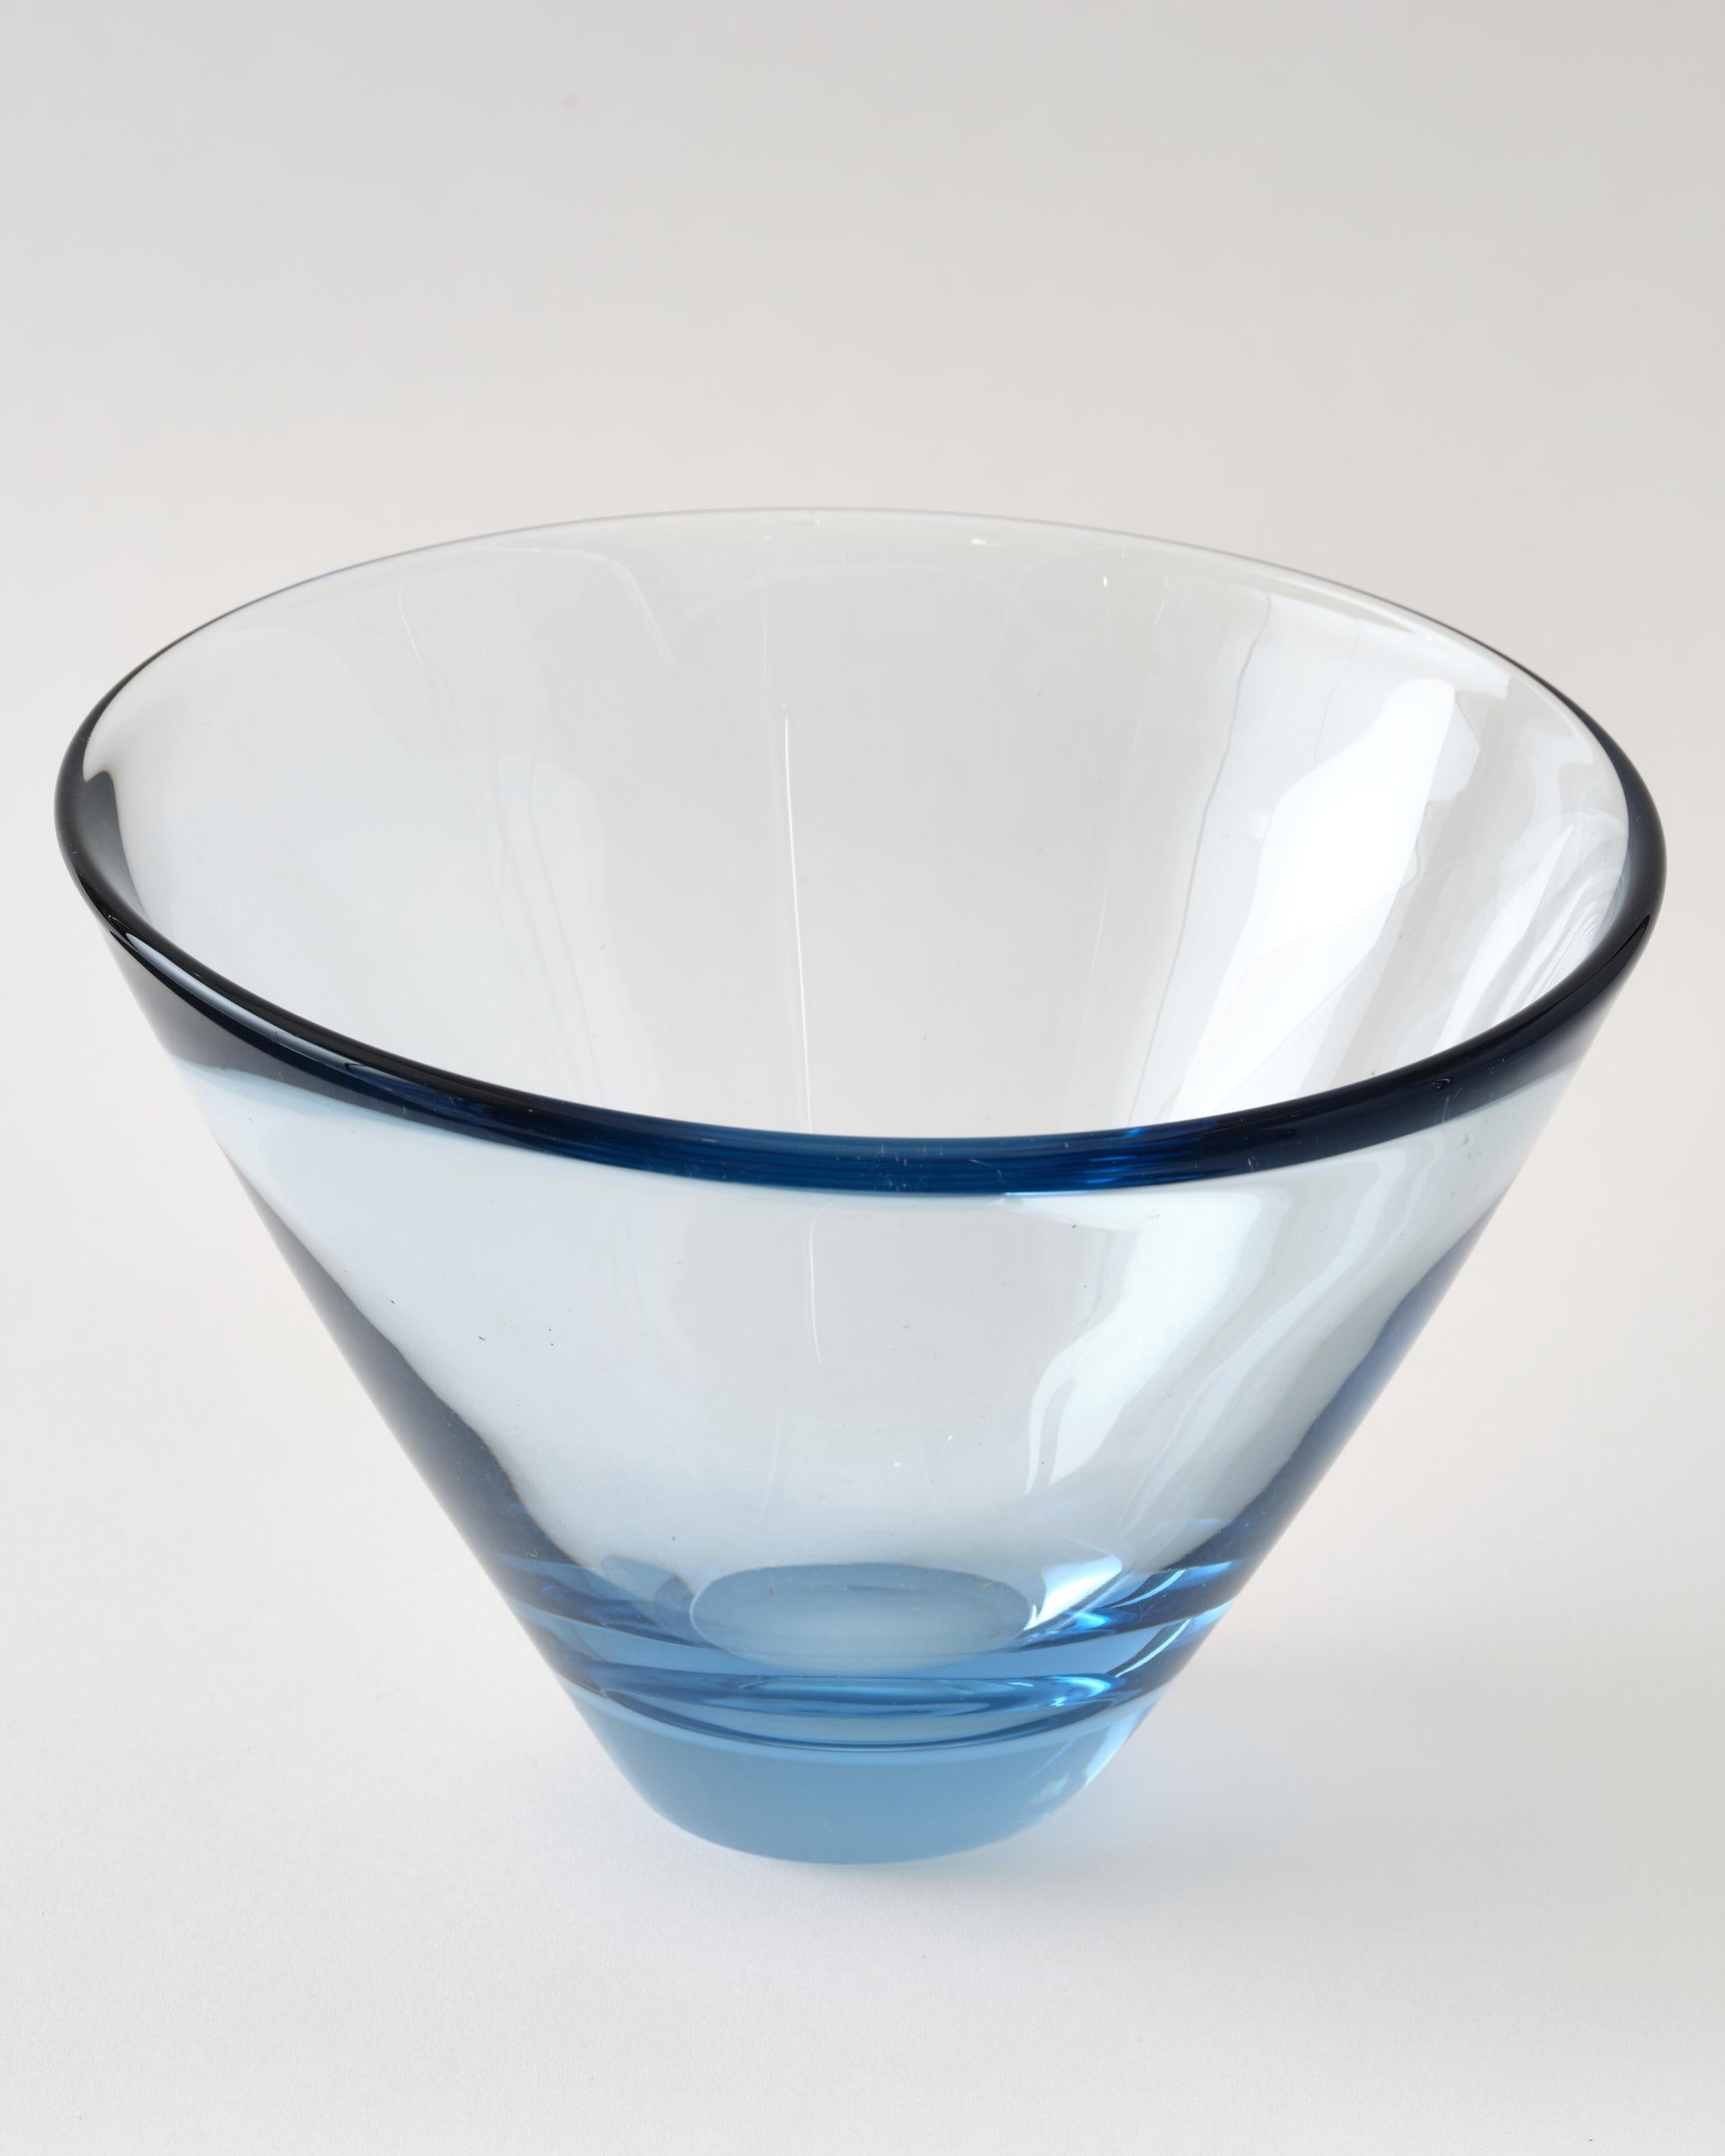 Glass bowl by Holmegaard, Denmark, C 1960, light blue color. The bowl has a beautiful soft round, curvy shape. It is made by hand and it is heavy. 